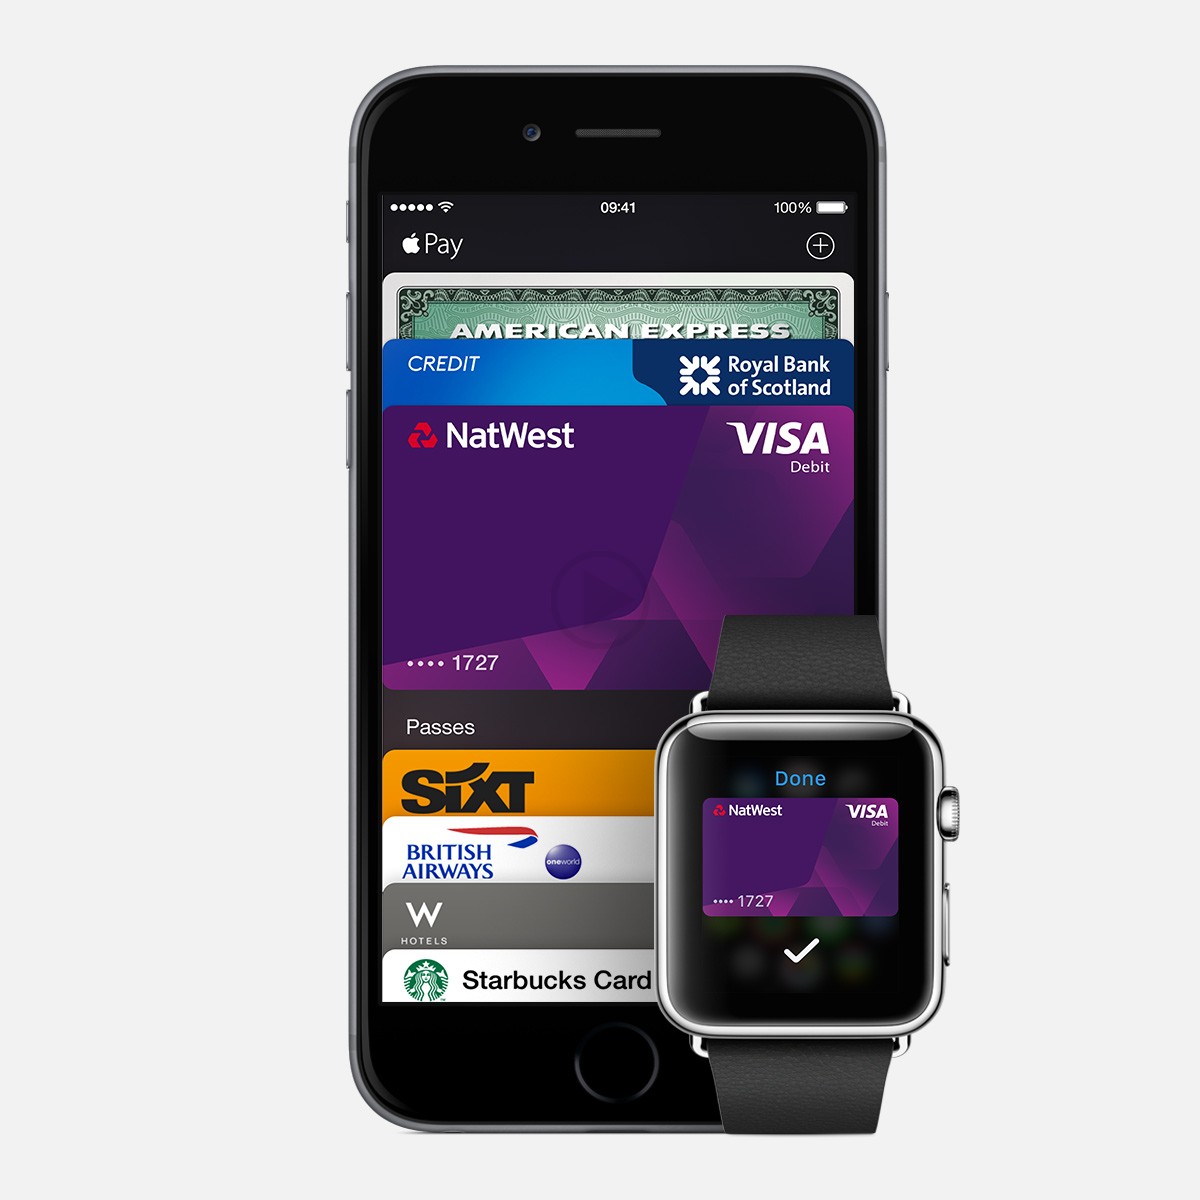 Apple Ties Up With 22 More Banks for Apple Pay Services